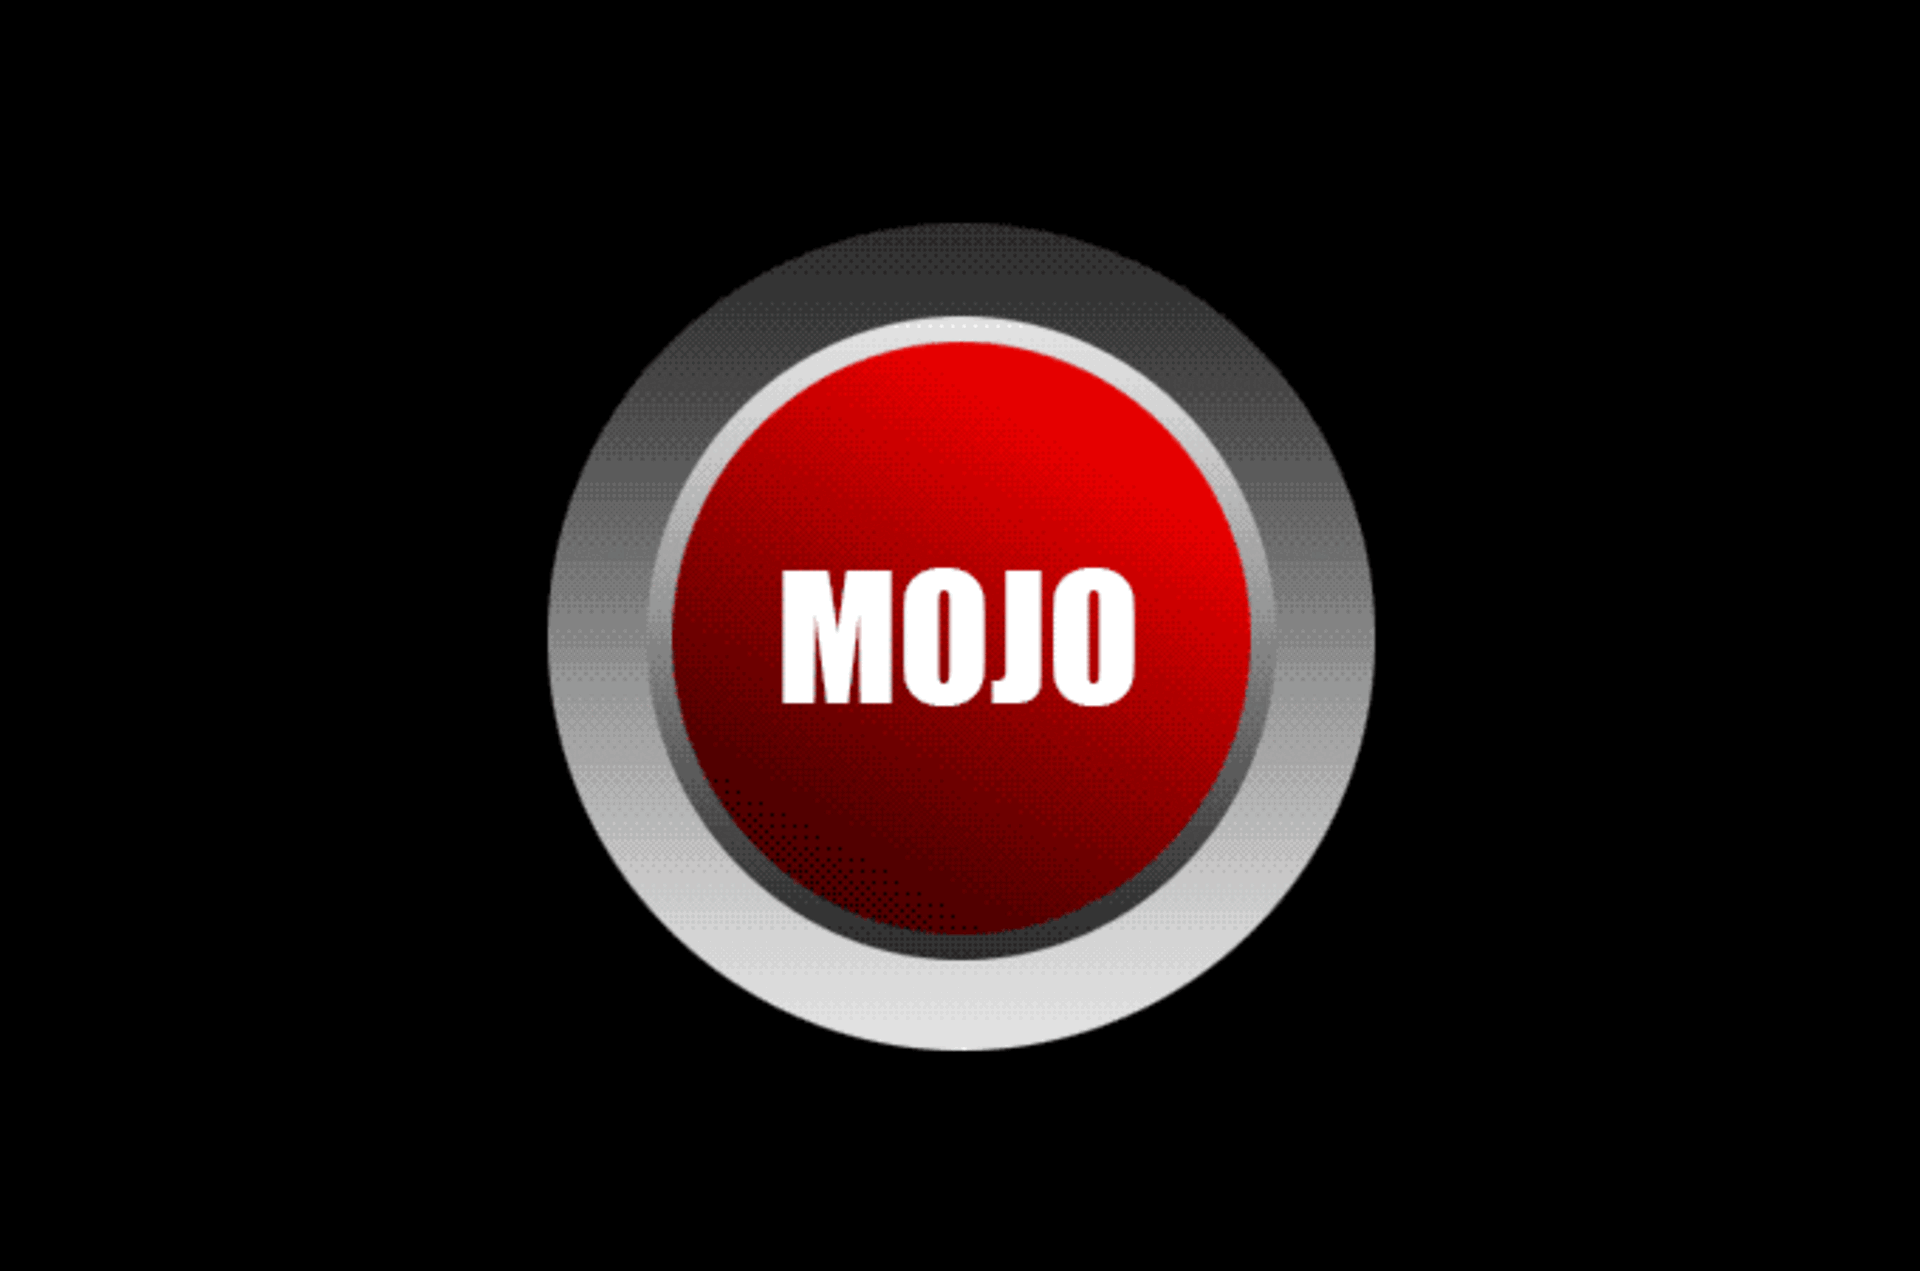 black background with a red button on it saying mojo